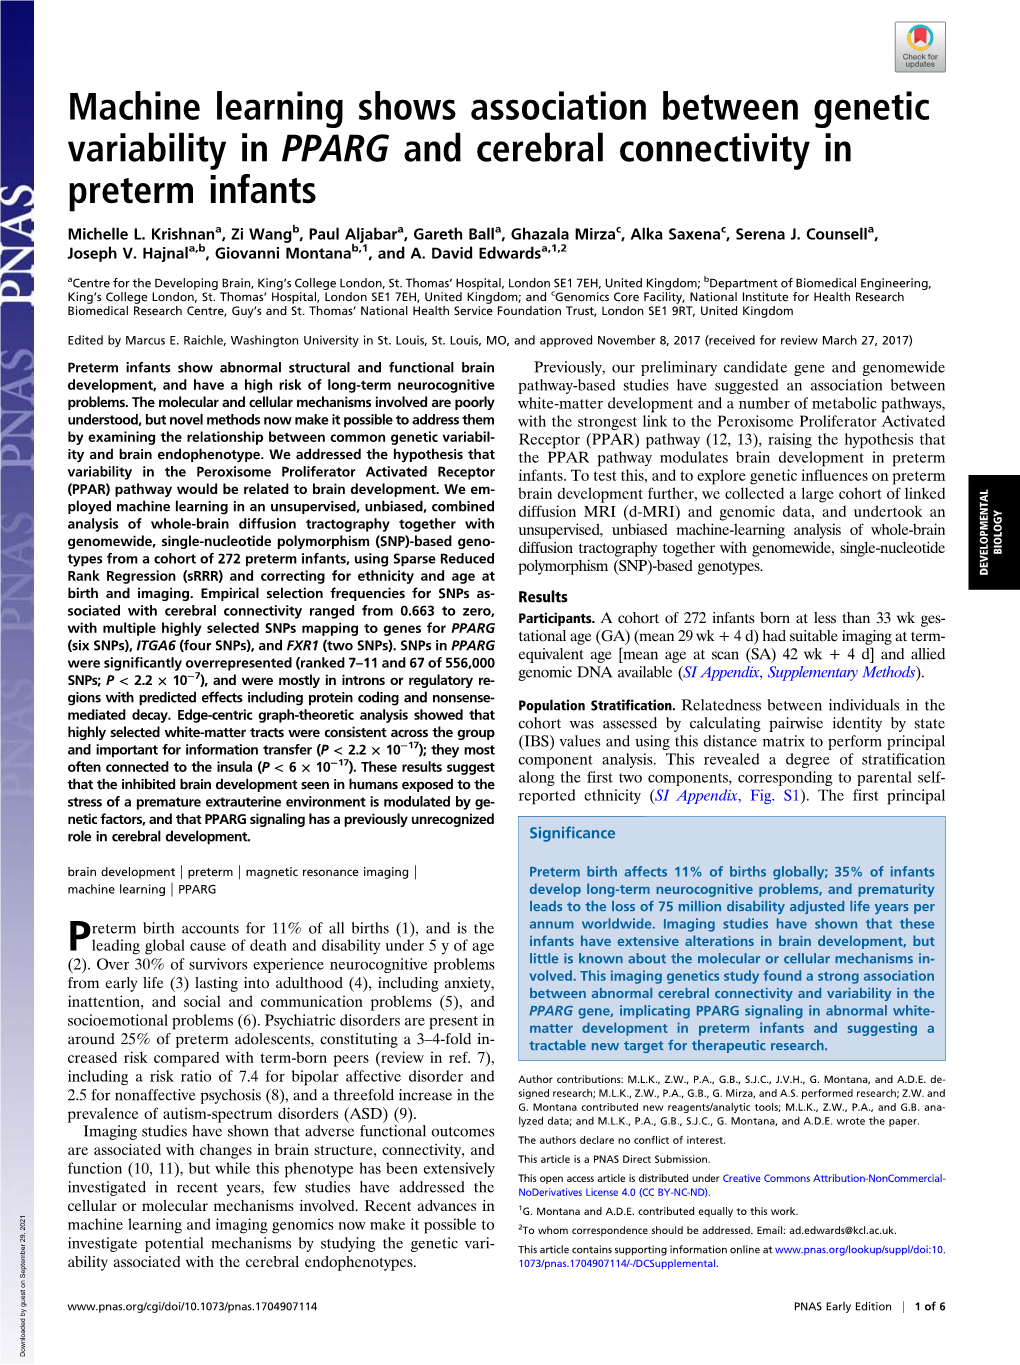 Machine Learning Shows Association Between Genetic Variability in PPARG and Cerebral Connectivity in Preterm Infants